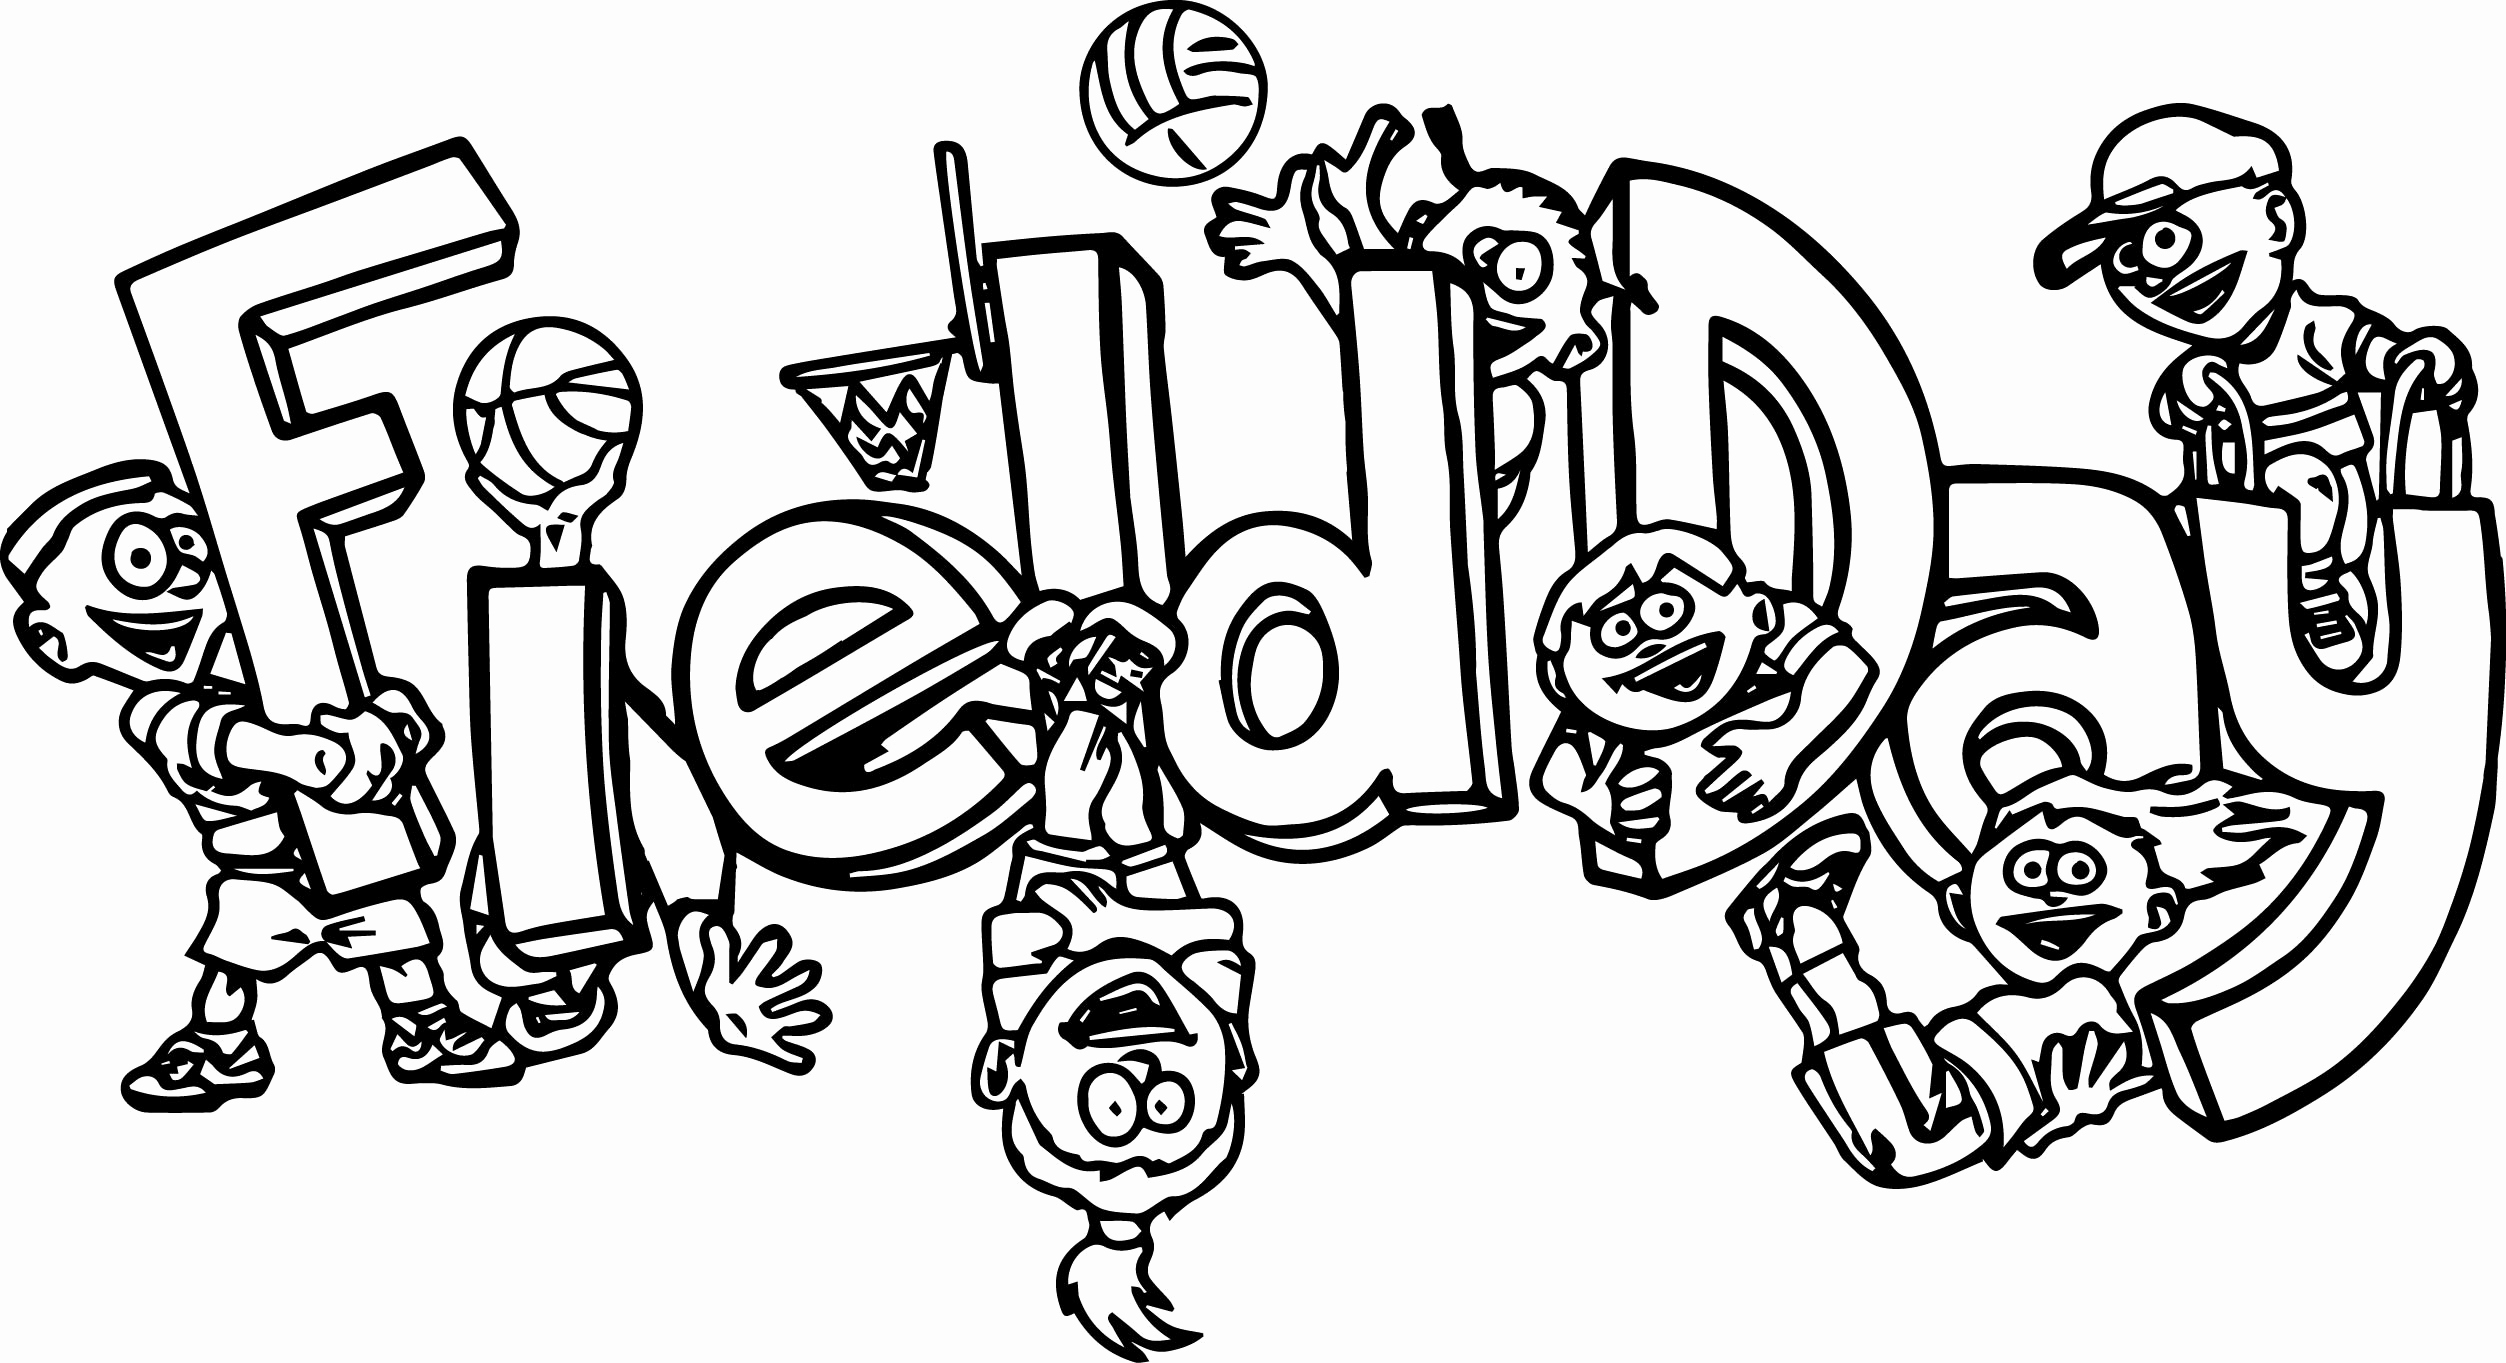 Track And Field Day Coloring Sheets Coloring Pages